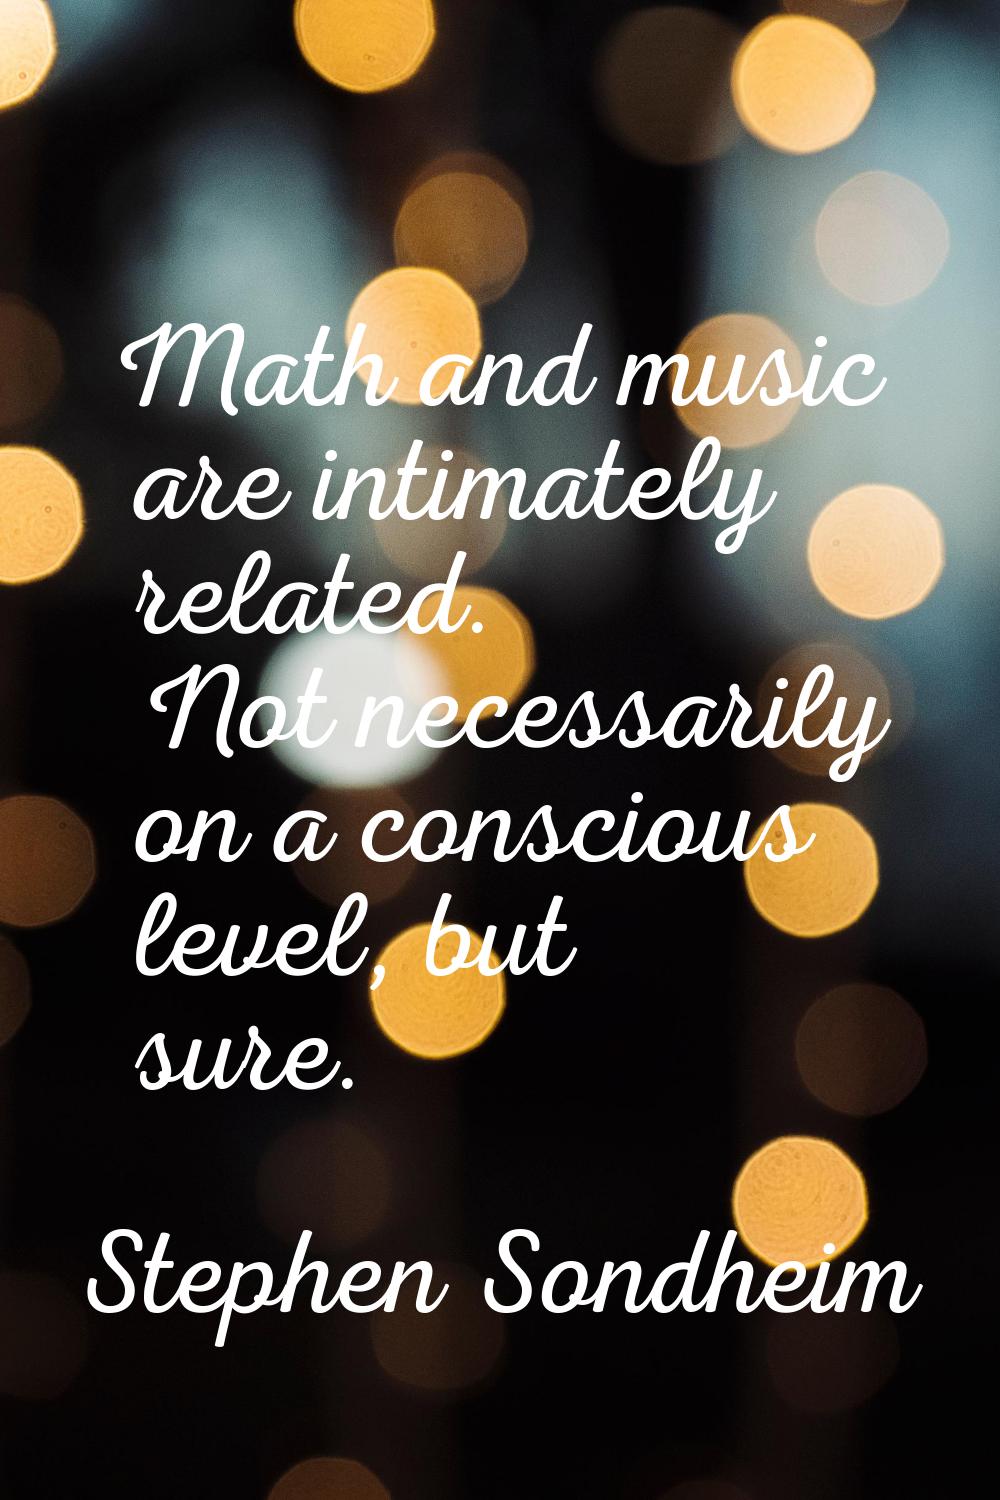 Math and music are intimately related. Not necessarily on a conscious level, but sure.